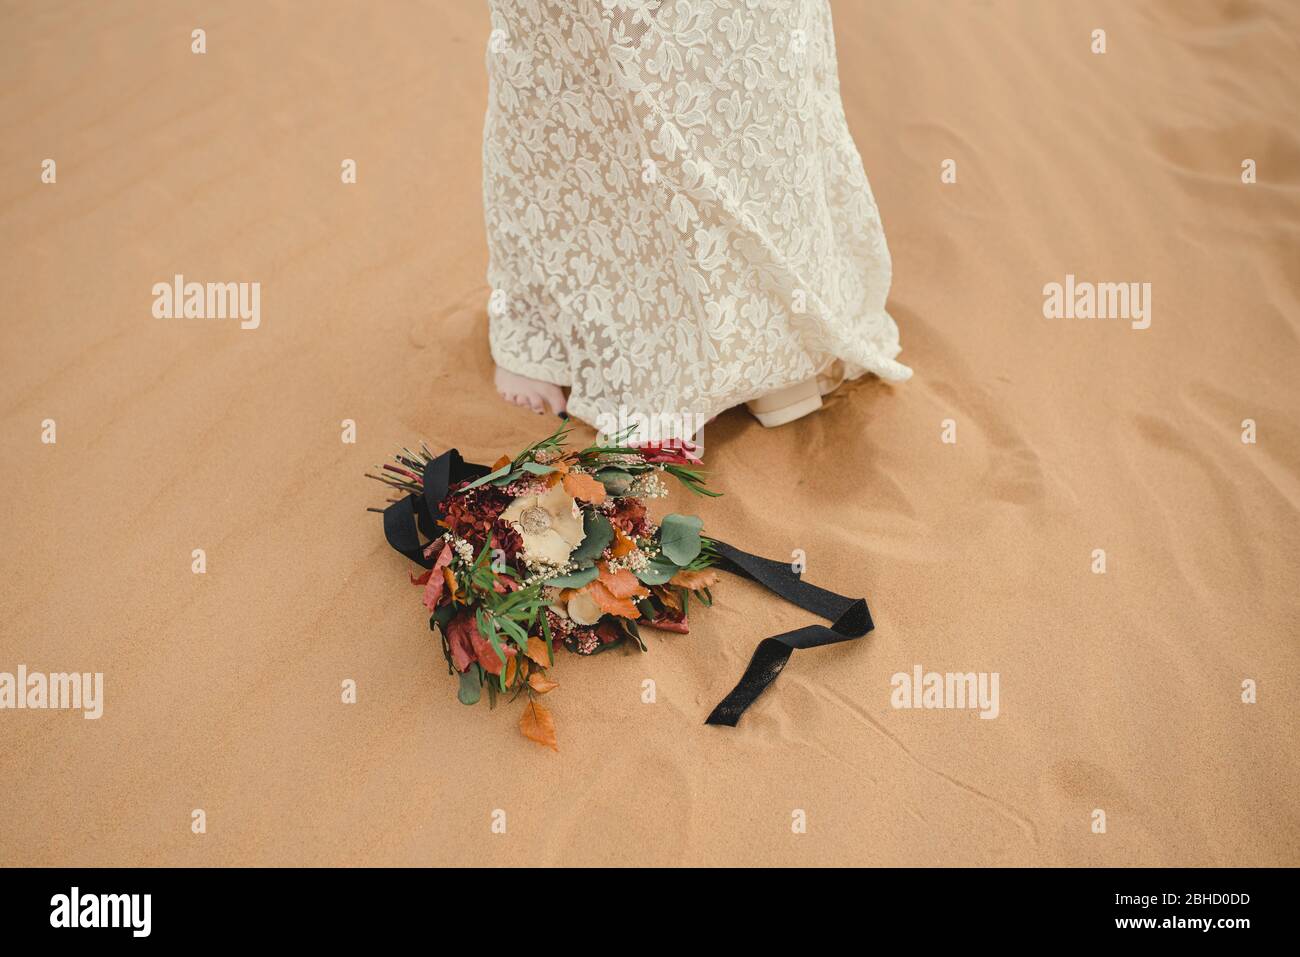 bridal bouquet lying on the sand next to the bride's feet. Stock Photo